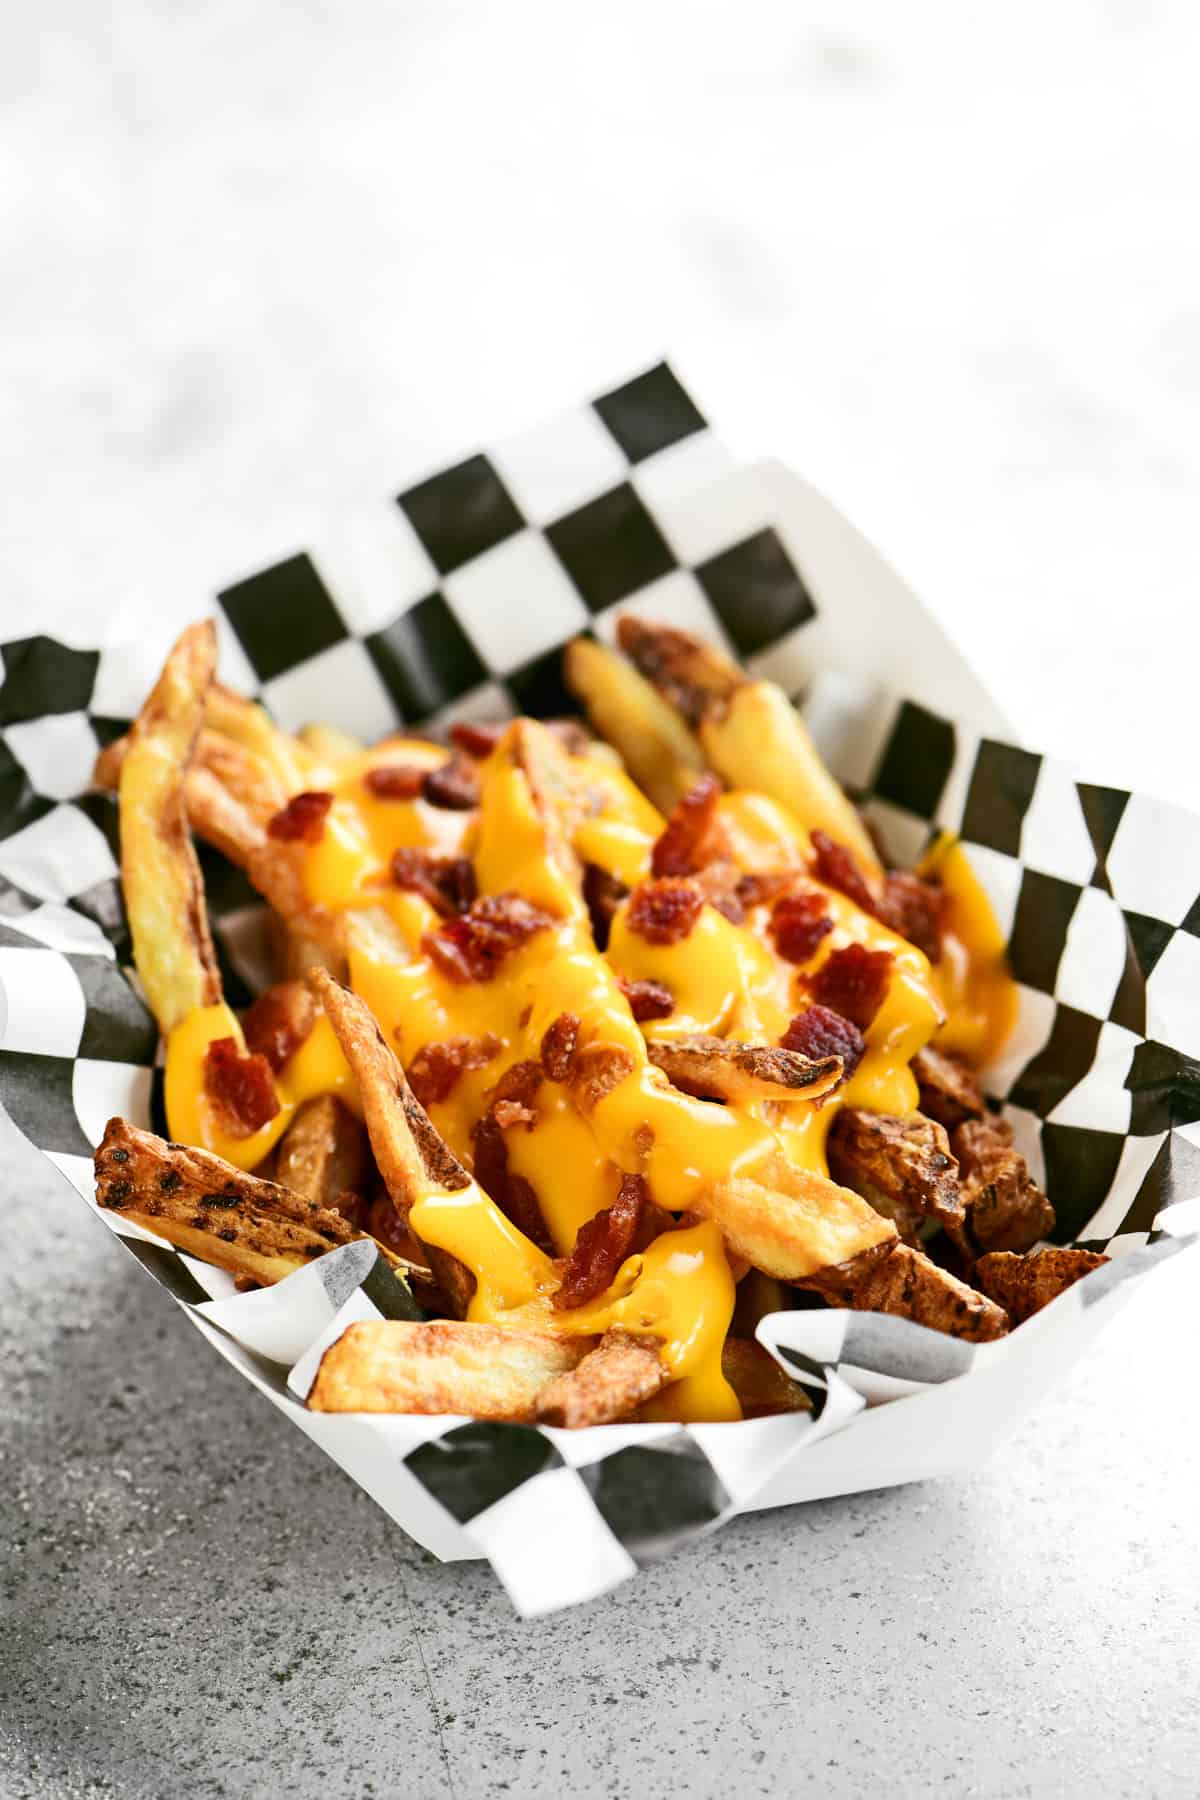 melted cheese and bacon bits on top of french fries.